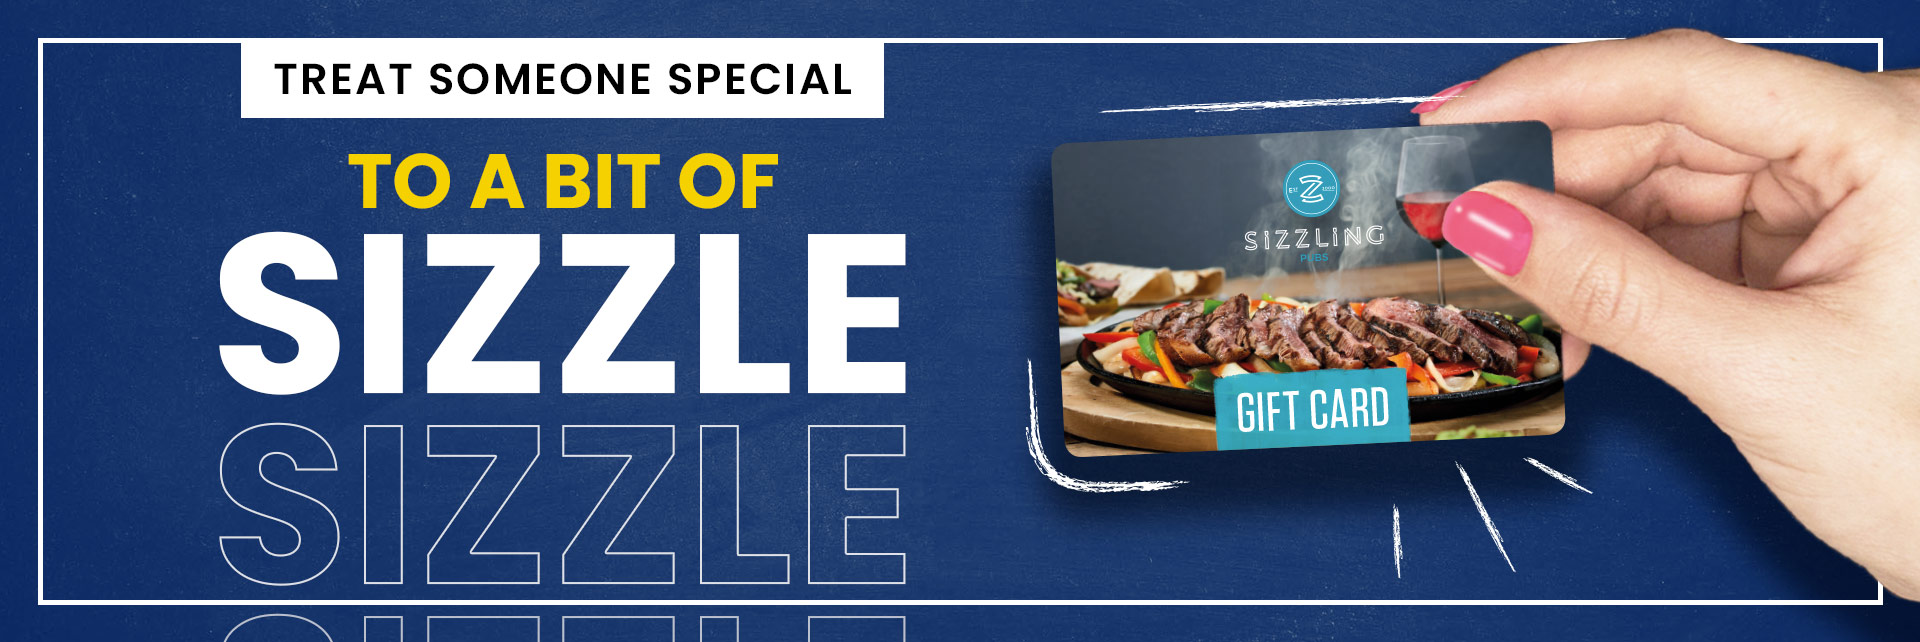 Sizzling Pubs Gift Card at The Wheatsheaf Inn in Chester